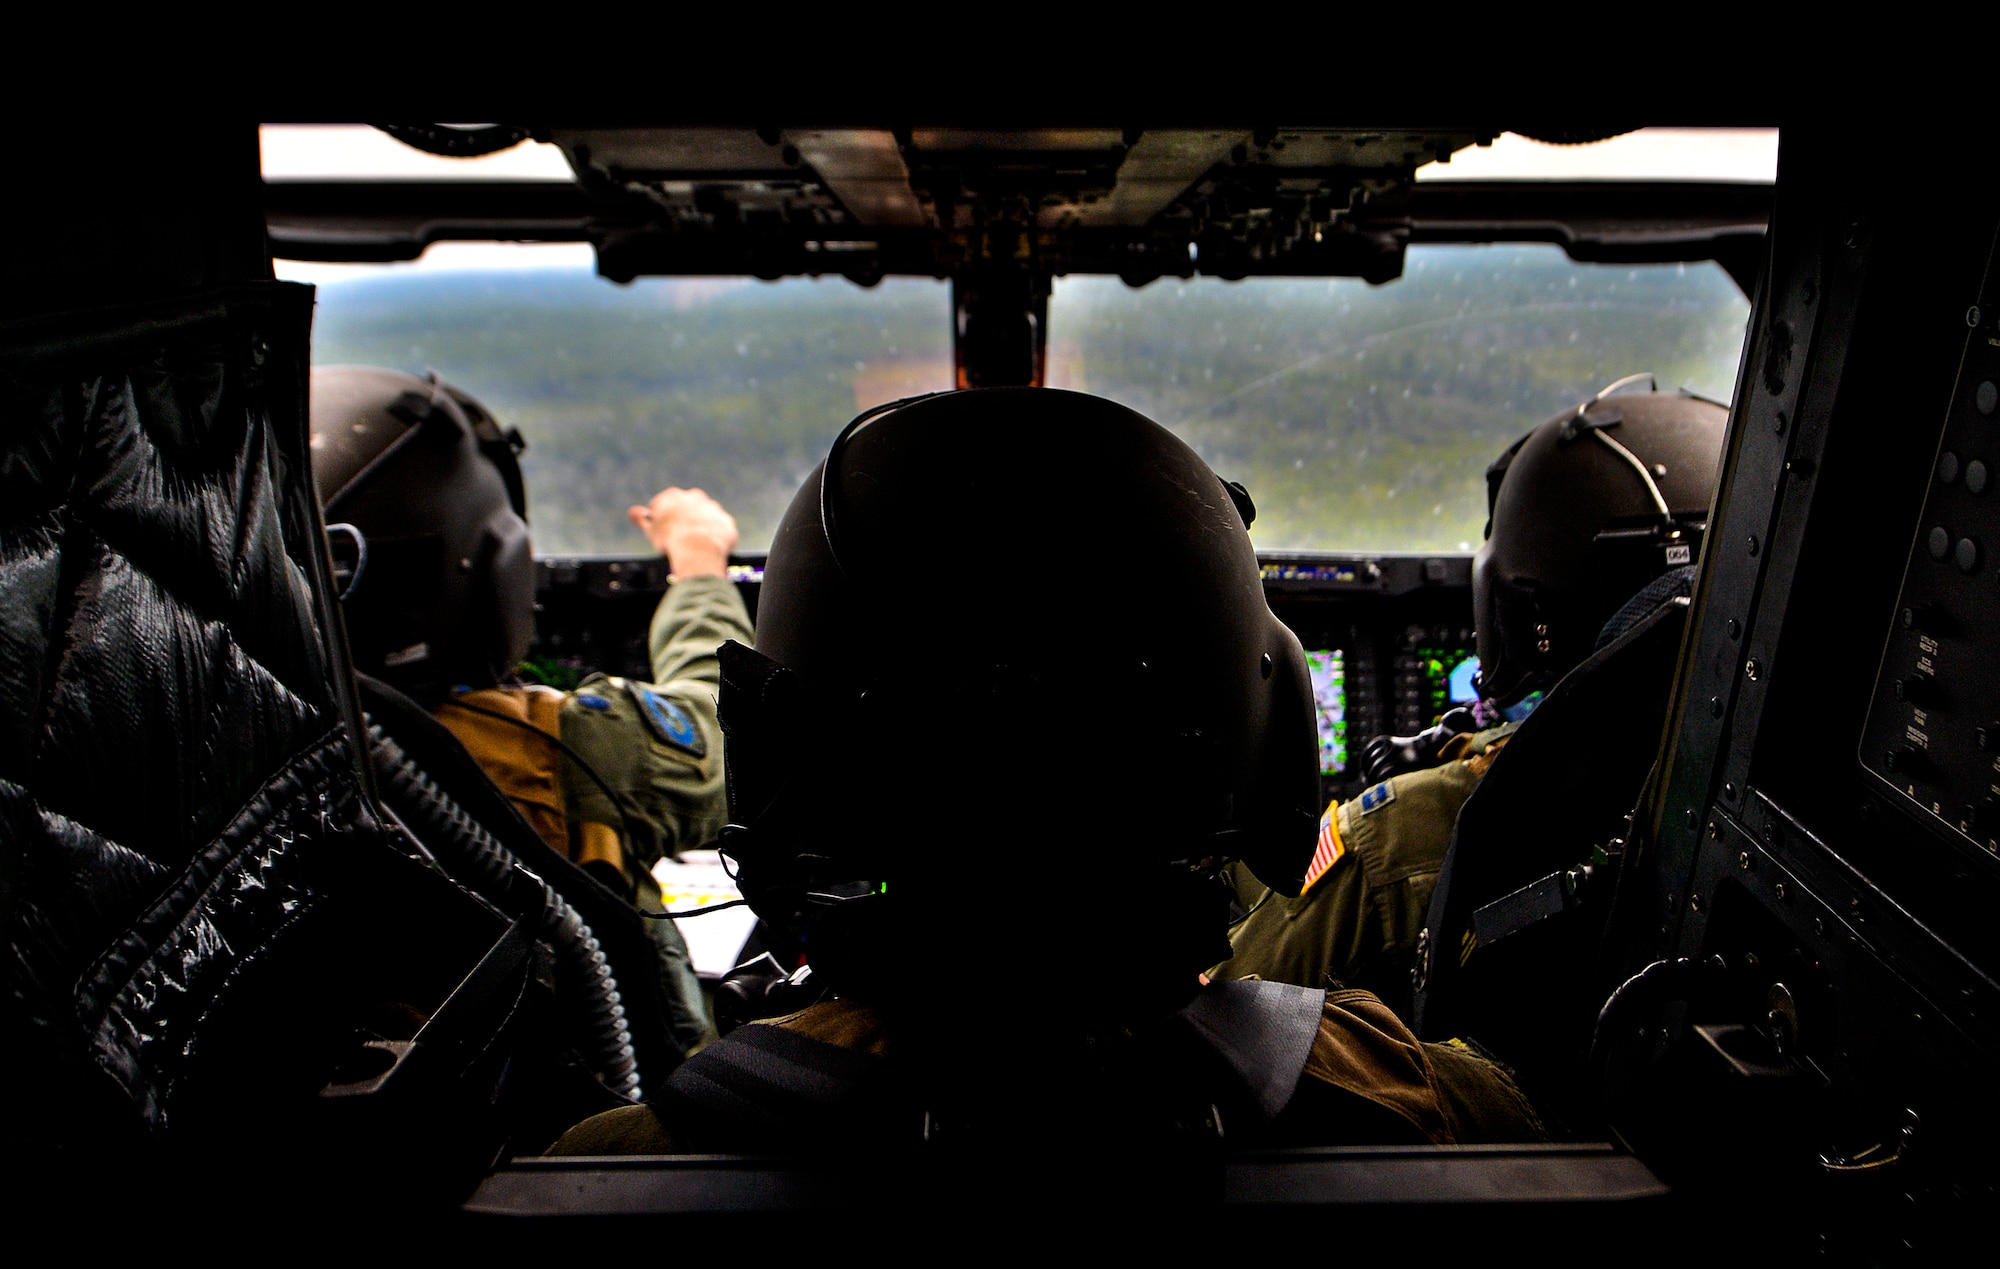 Tech. Sgt. Edilberto Malave, 8th Special Operations Squadron flight engineer, looks out the front windows of a CV-22 Osprey near Hurlburt Field, Fla., March 6, 2014. Malave was involved in an Osprey crash in June 2012, but has been recertified and cleared to perform the mission. (U.S. Air Force photo/Senior Airman Christopher Callaway) 